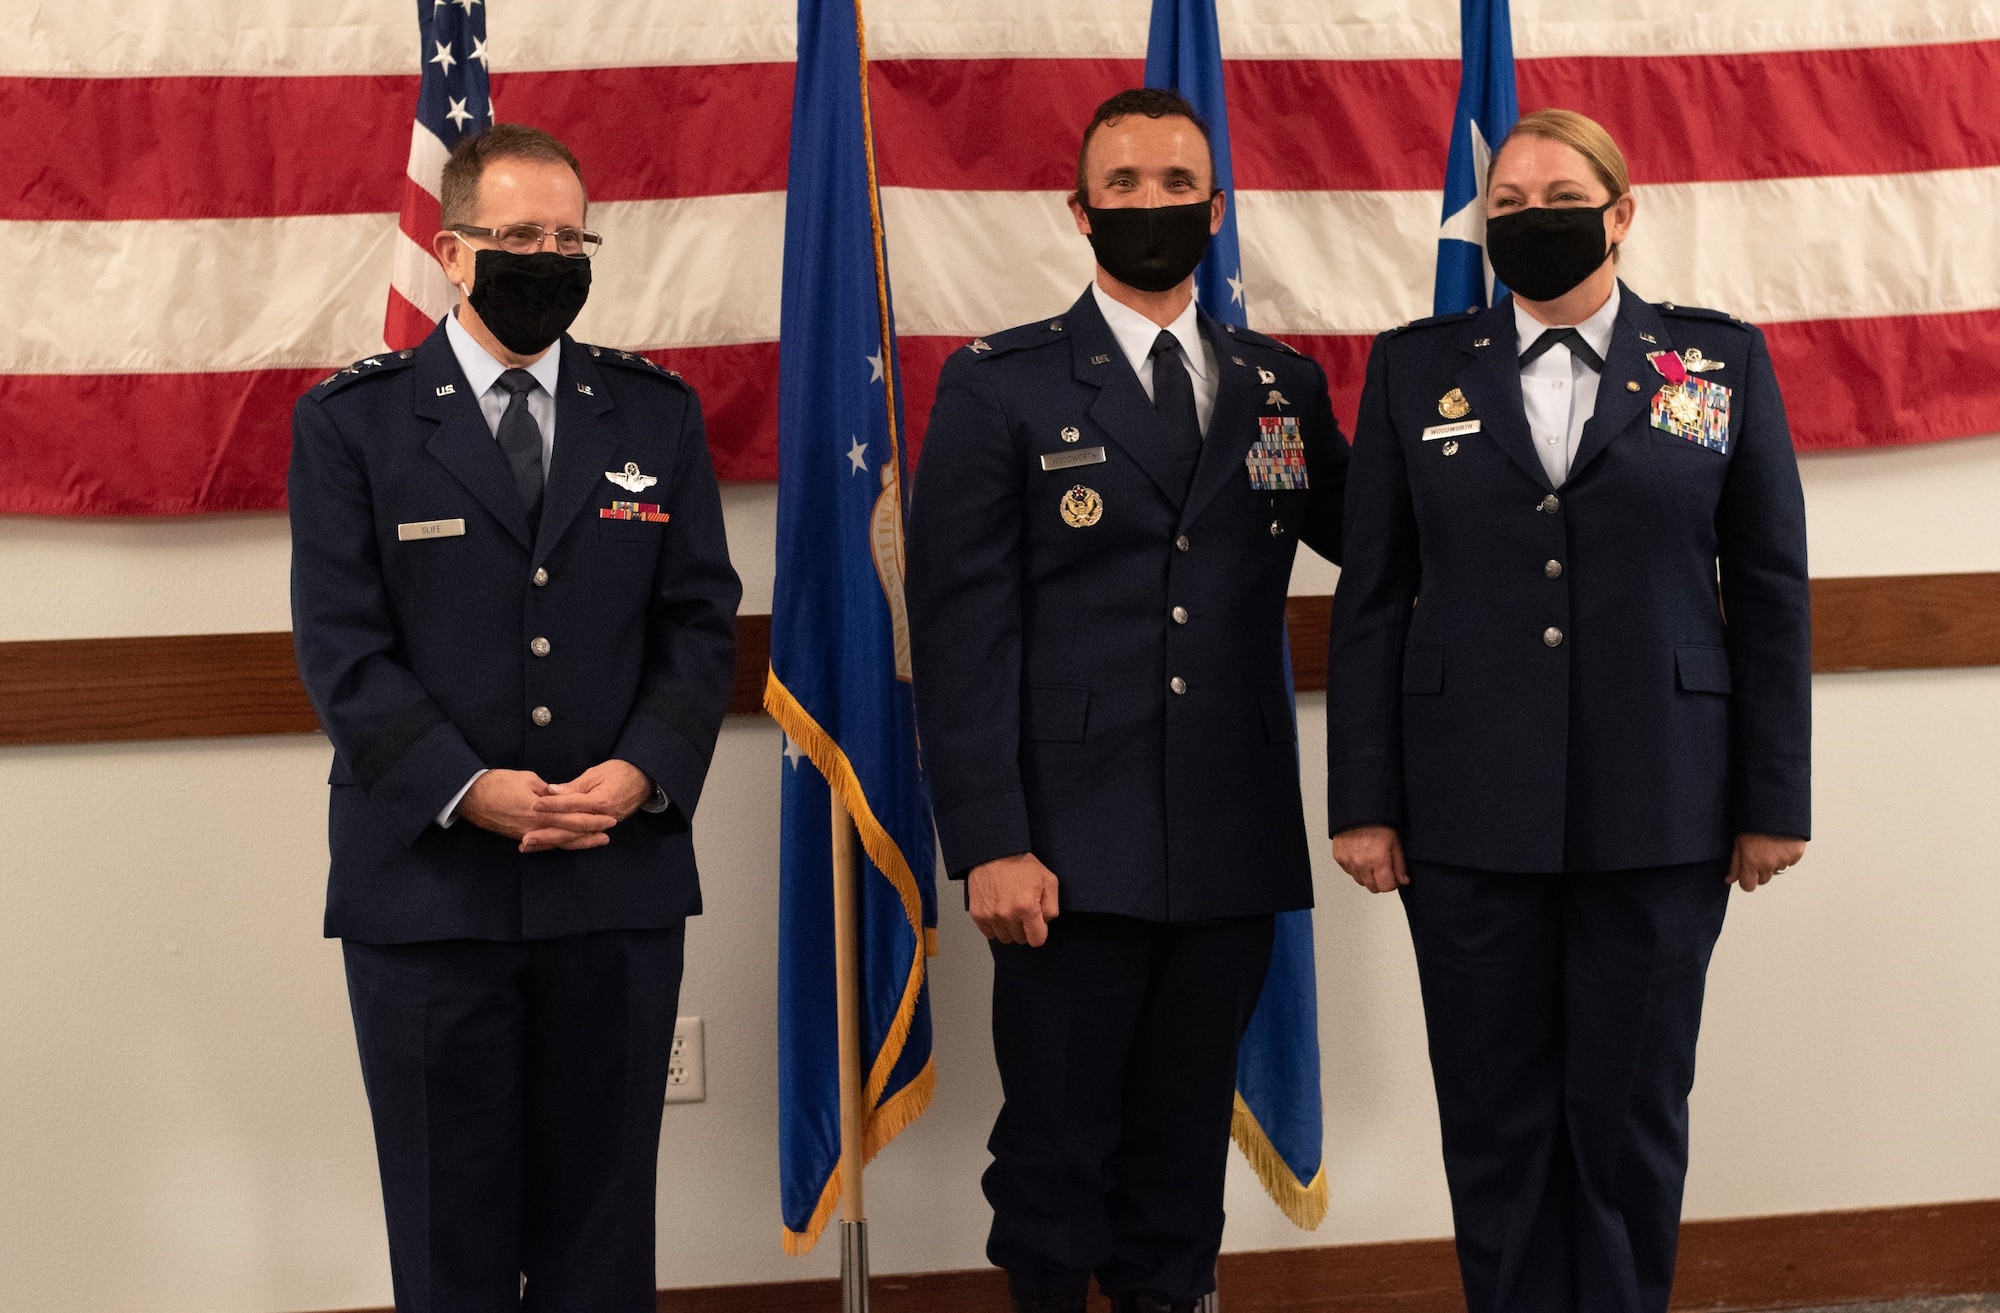 U.S. Air Force Col. Shelley Woodworth, right, stands with her husband U.S. Air Force Col. Travis Woodworth, center, and U.S. Air Force Lt. Gen. Jim Slife, Air Force Special Operations Commander, during her retirement ceremony on Nov. 24, 2020.